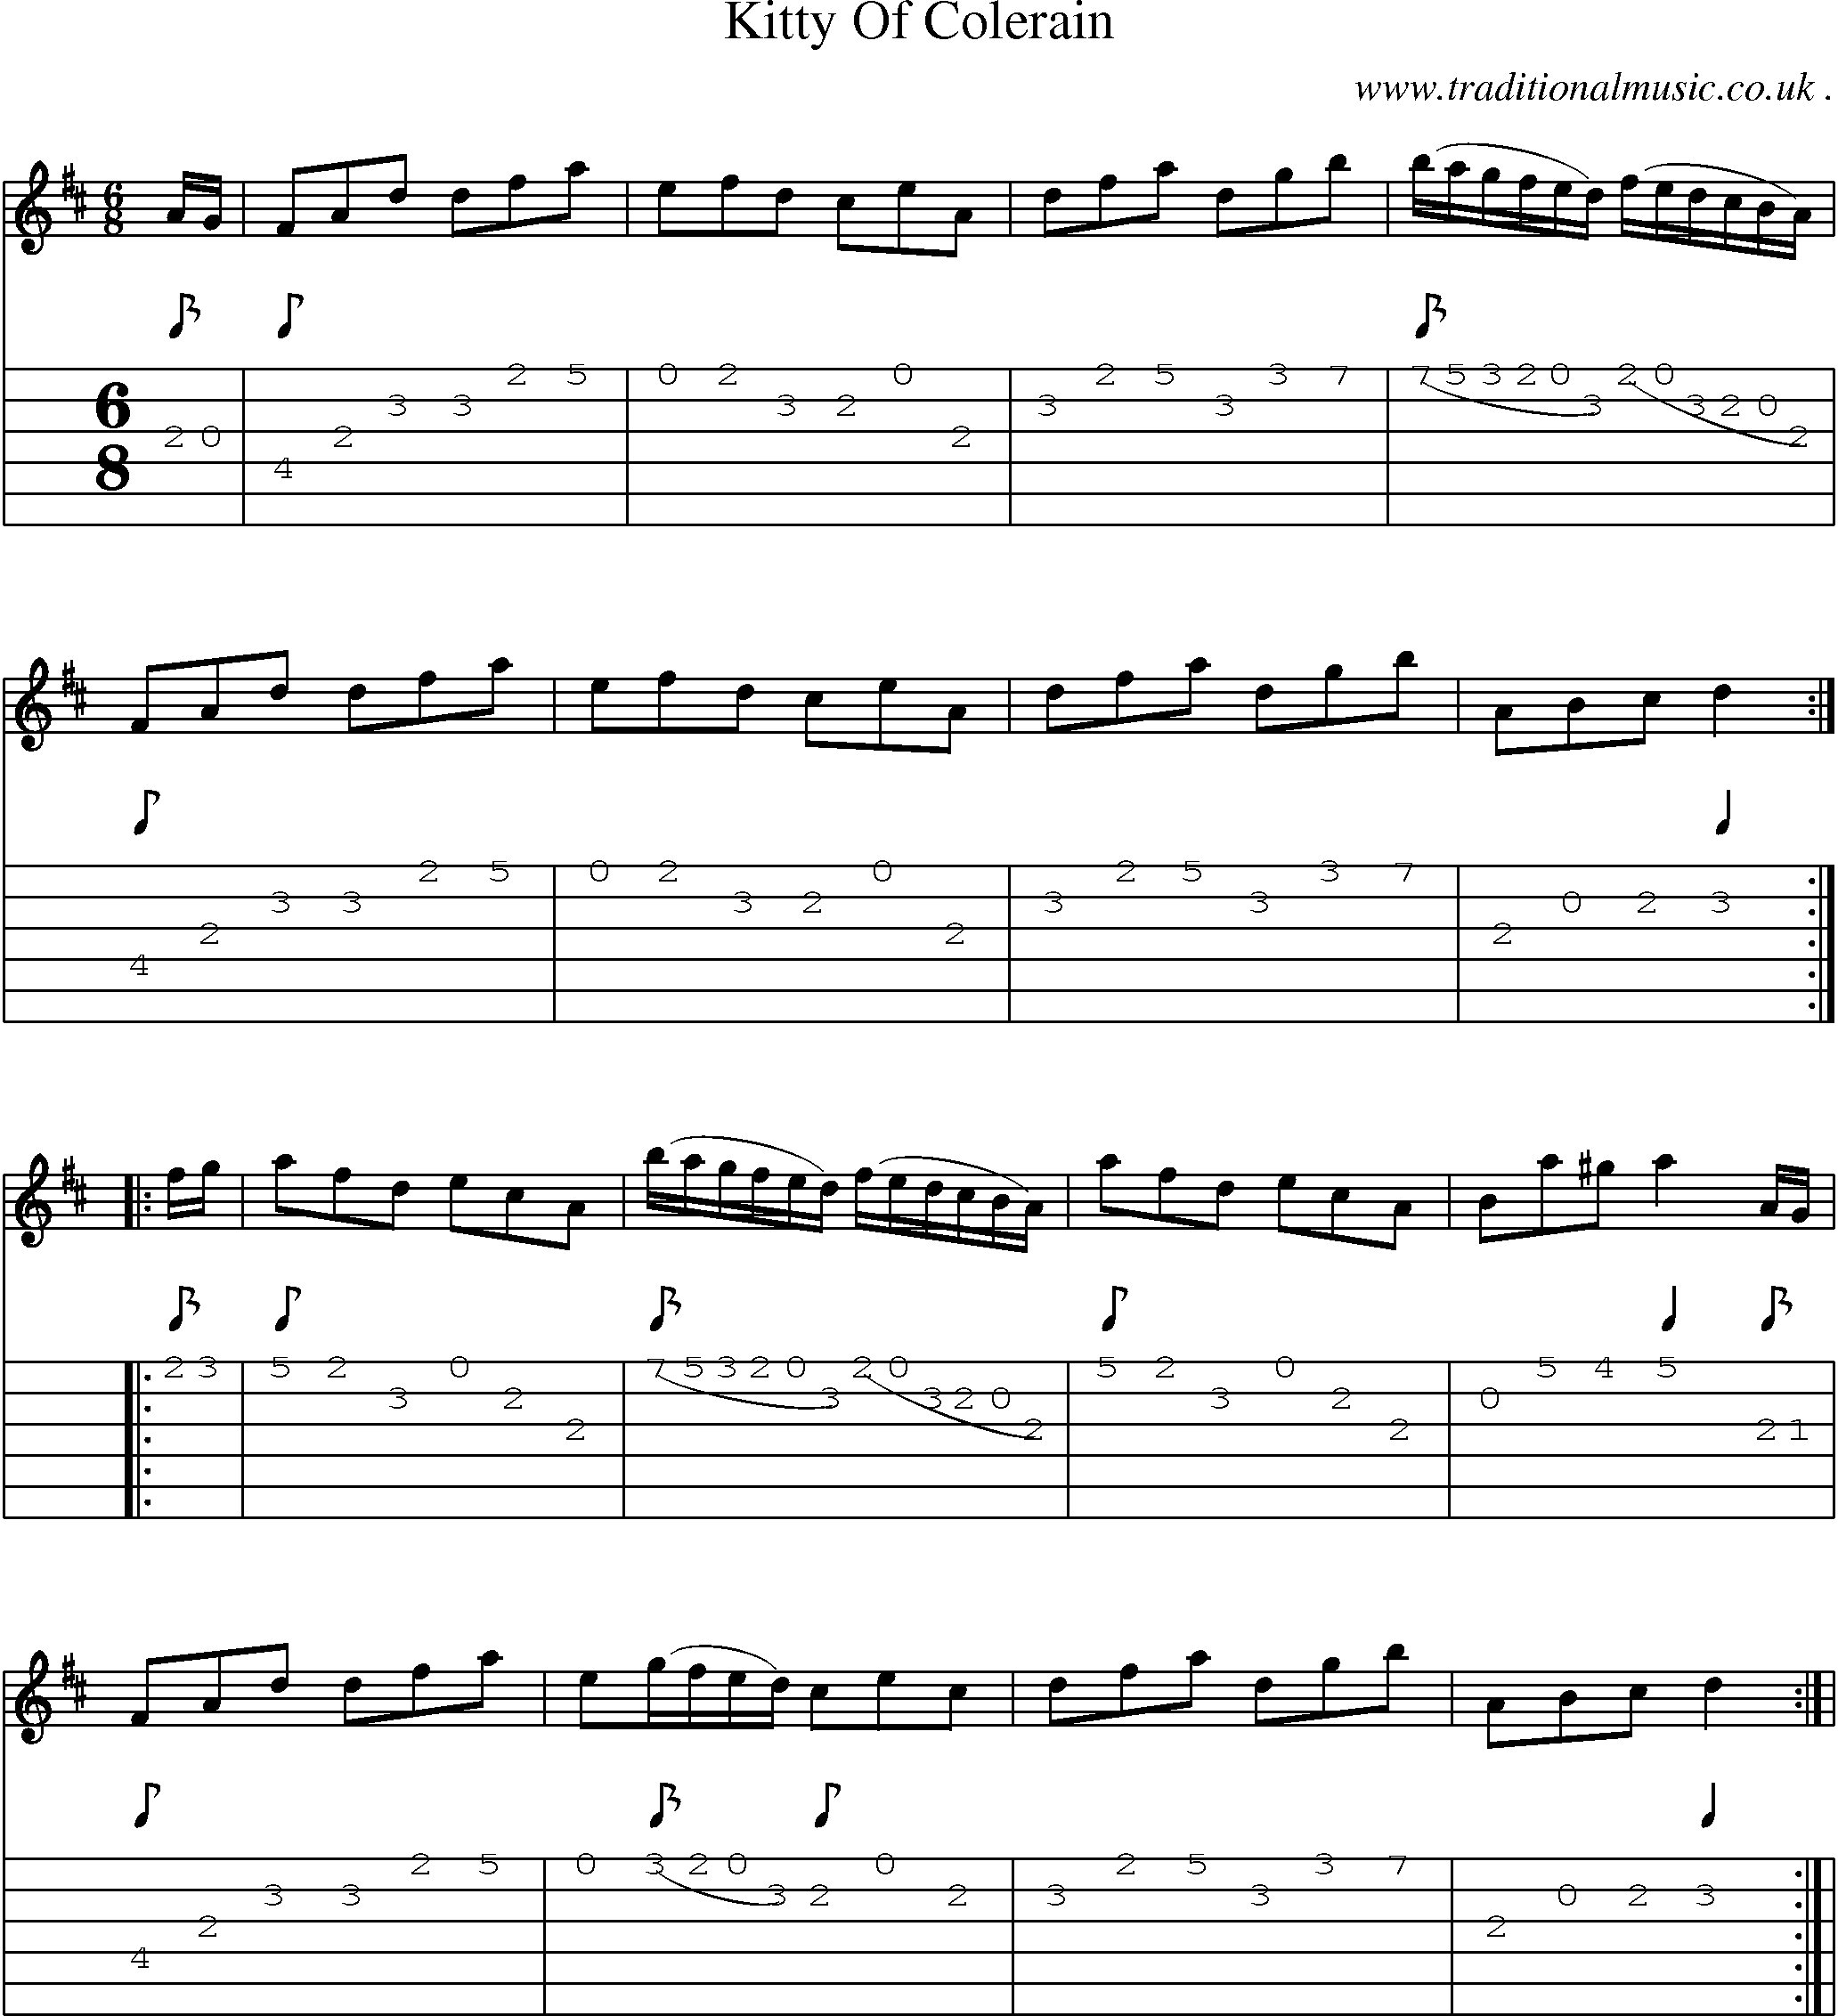 Sheet-Music and Guitar Tabs for Kitty Of Colerain